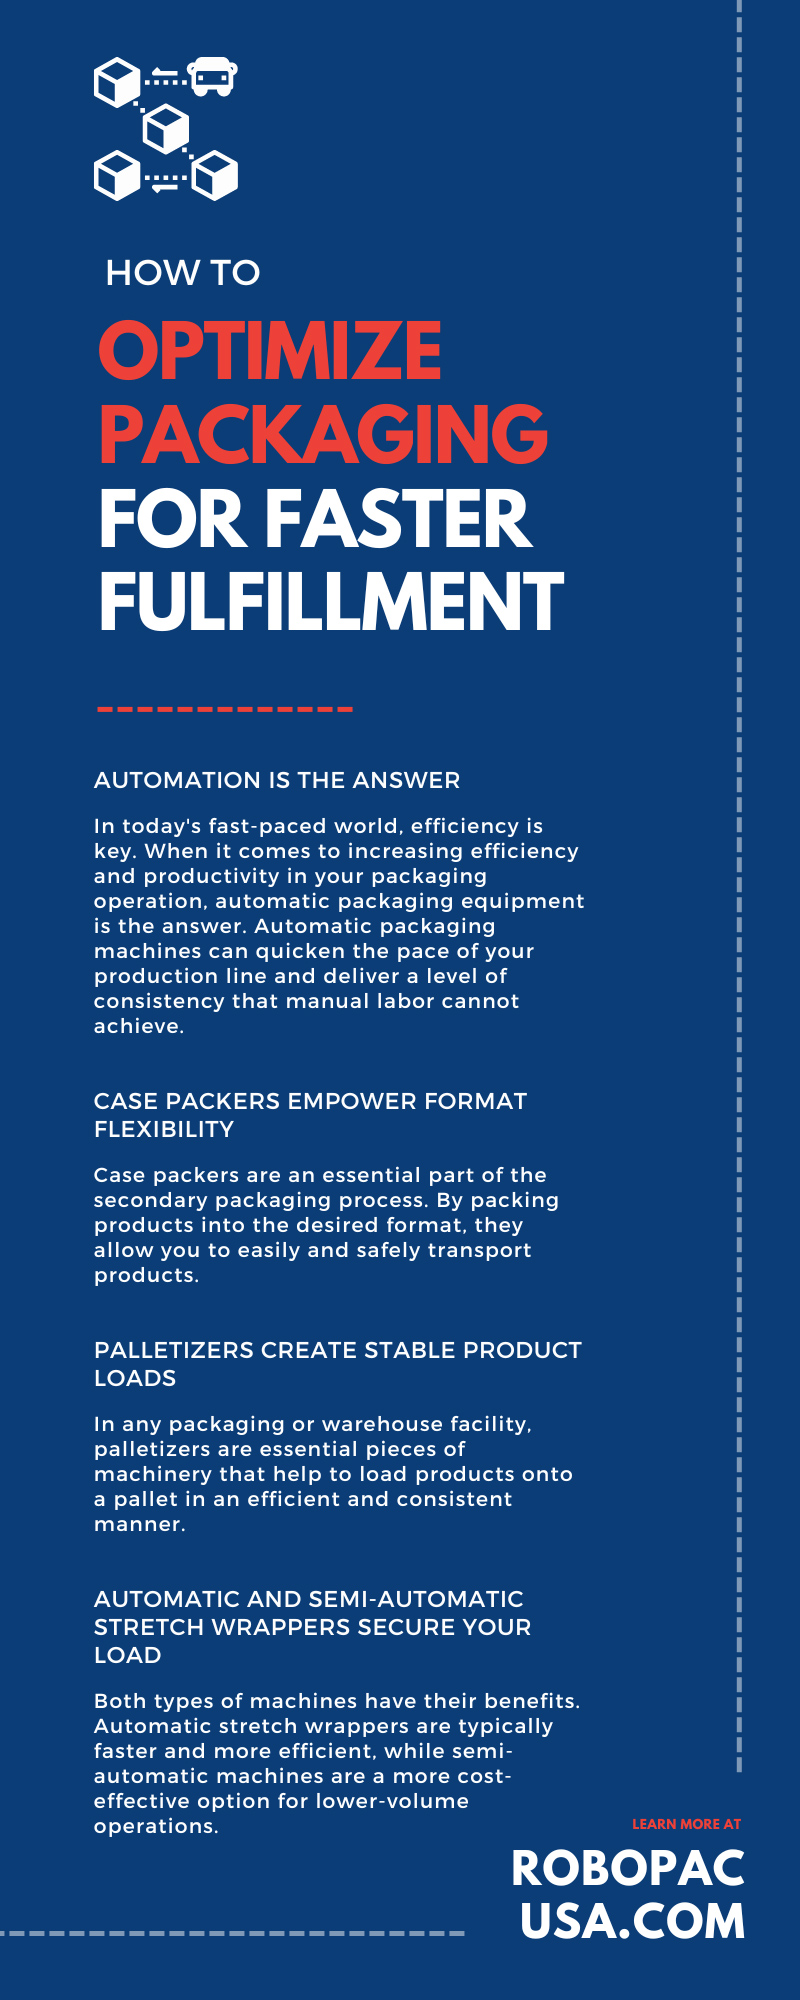 How To Optimize Packaging for Faster Fulfillment